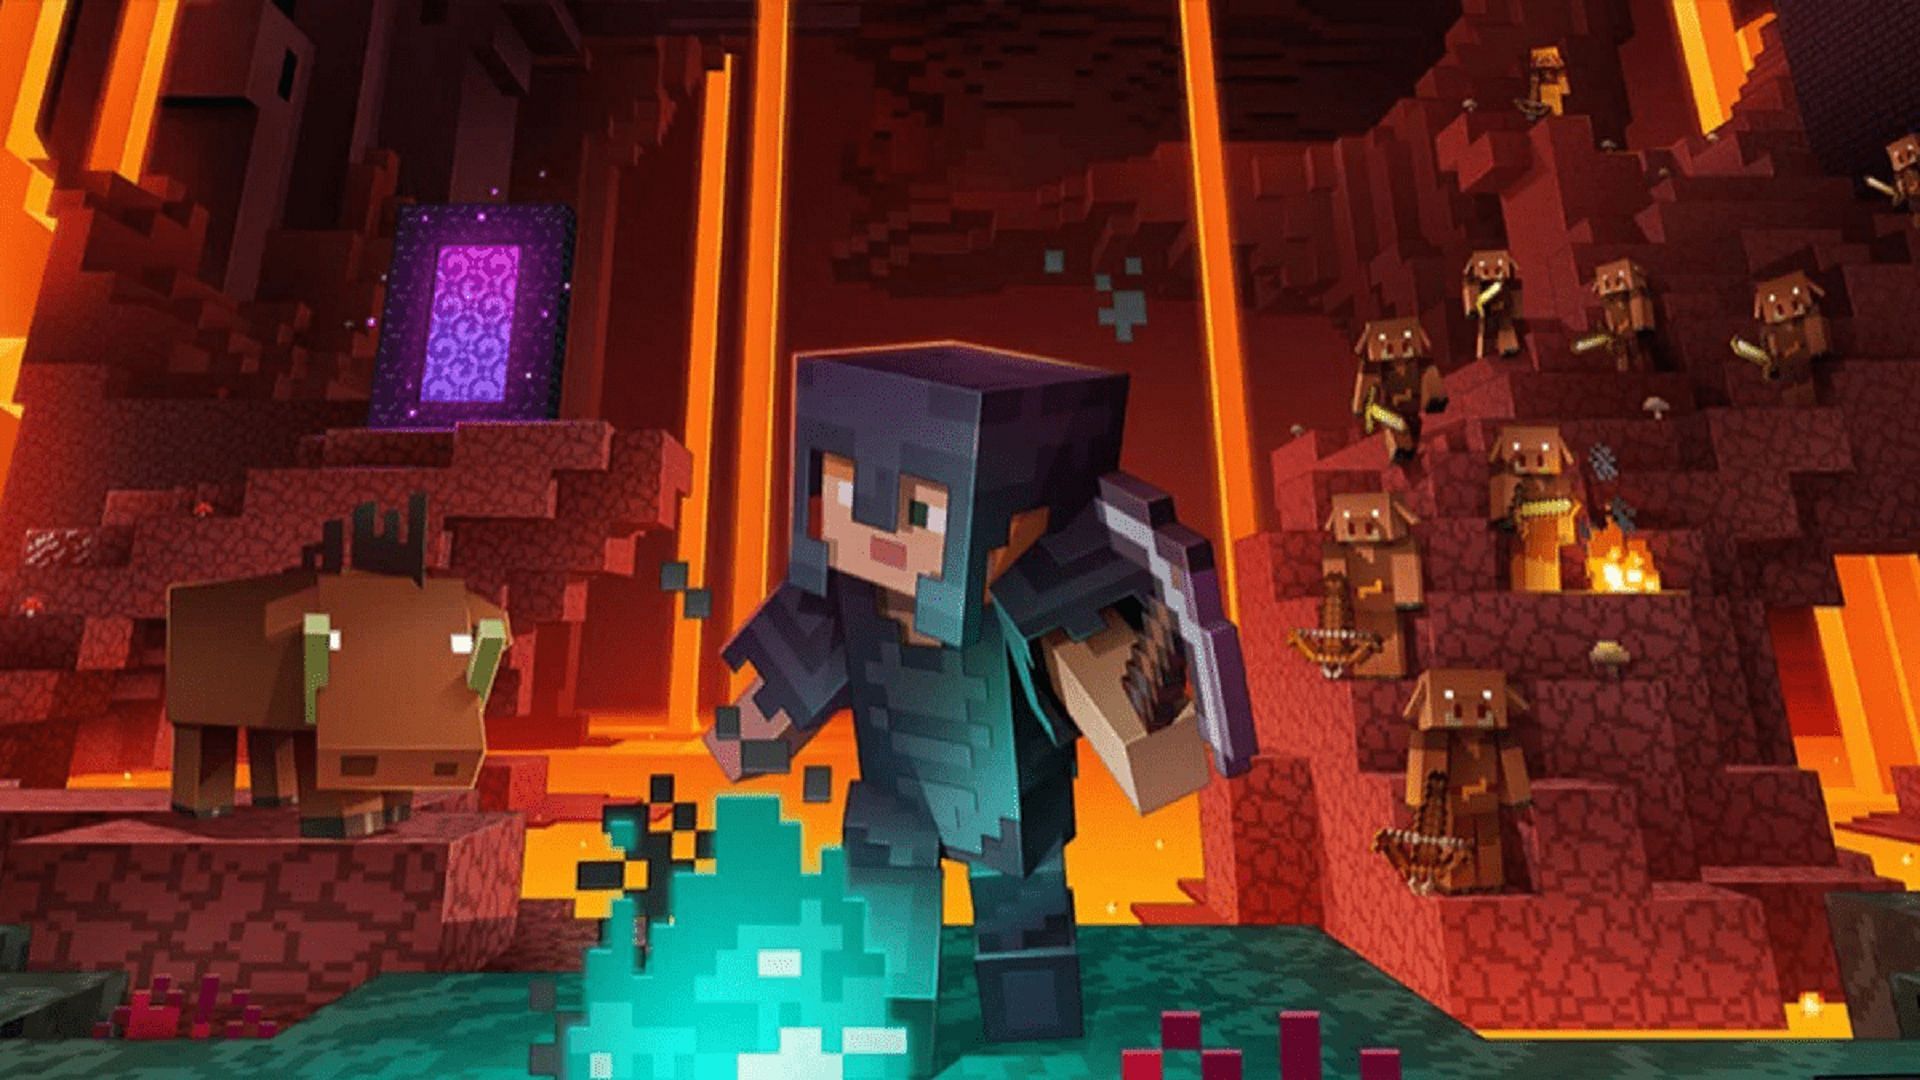 Official art from Minecraft